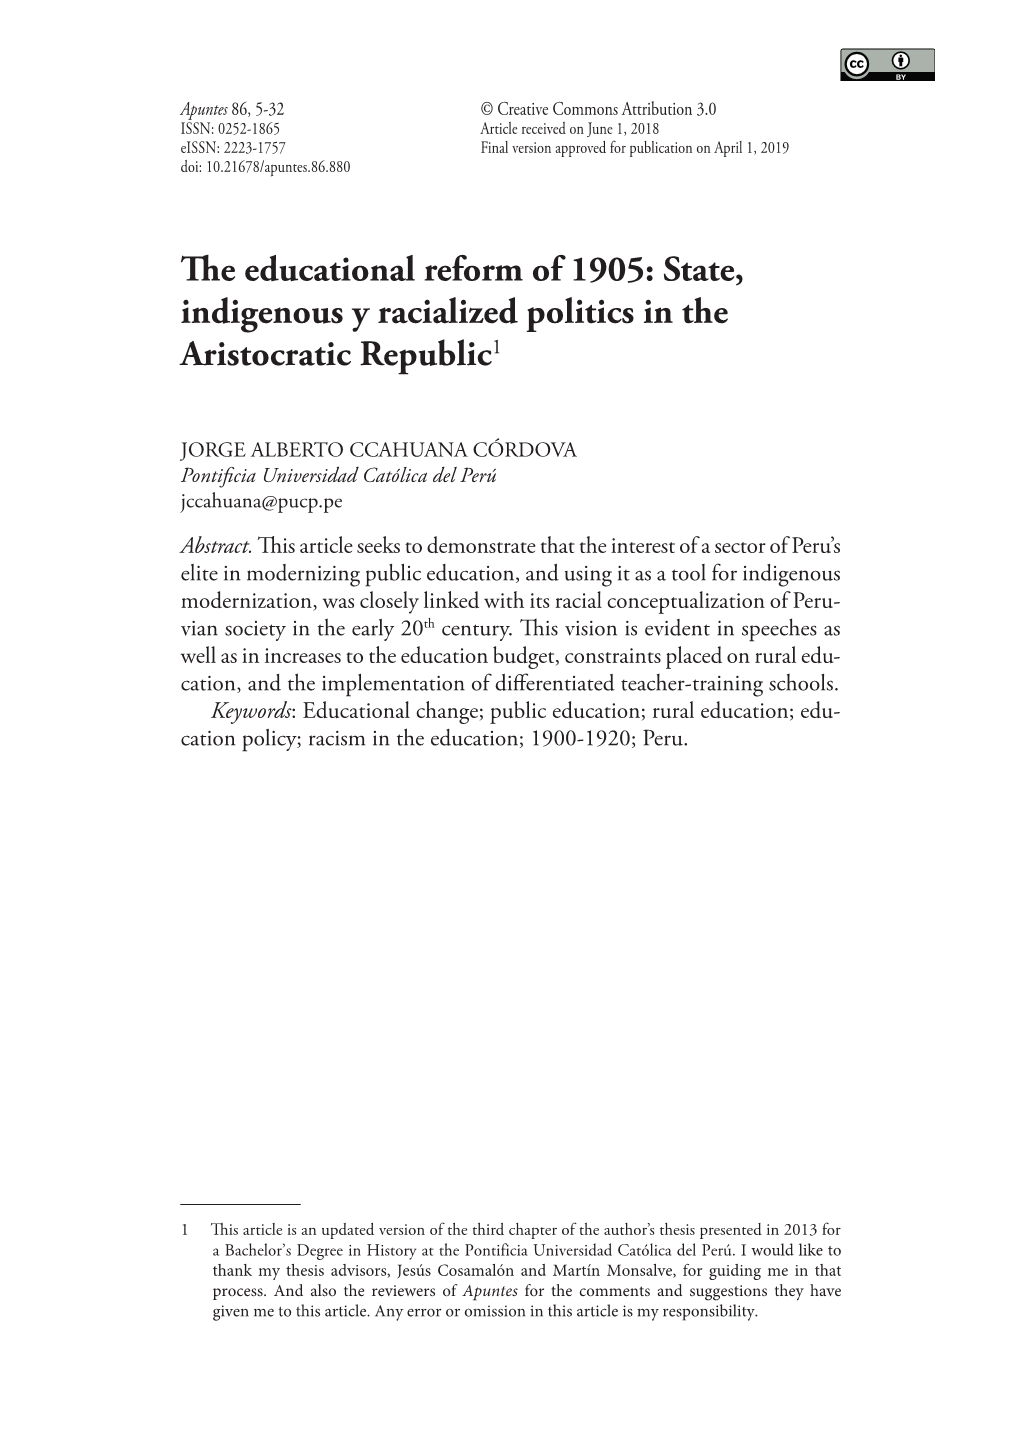 The Educational Reform of 1905: State, Indigenous Y Racialized Politics in the Aristocratic Republic1